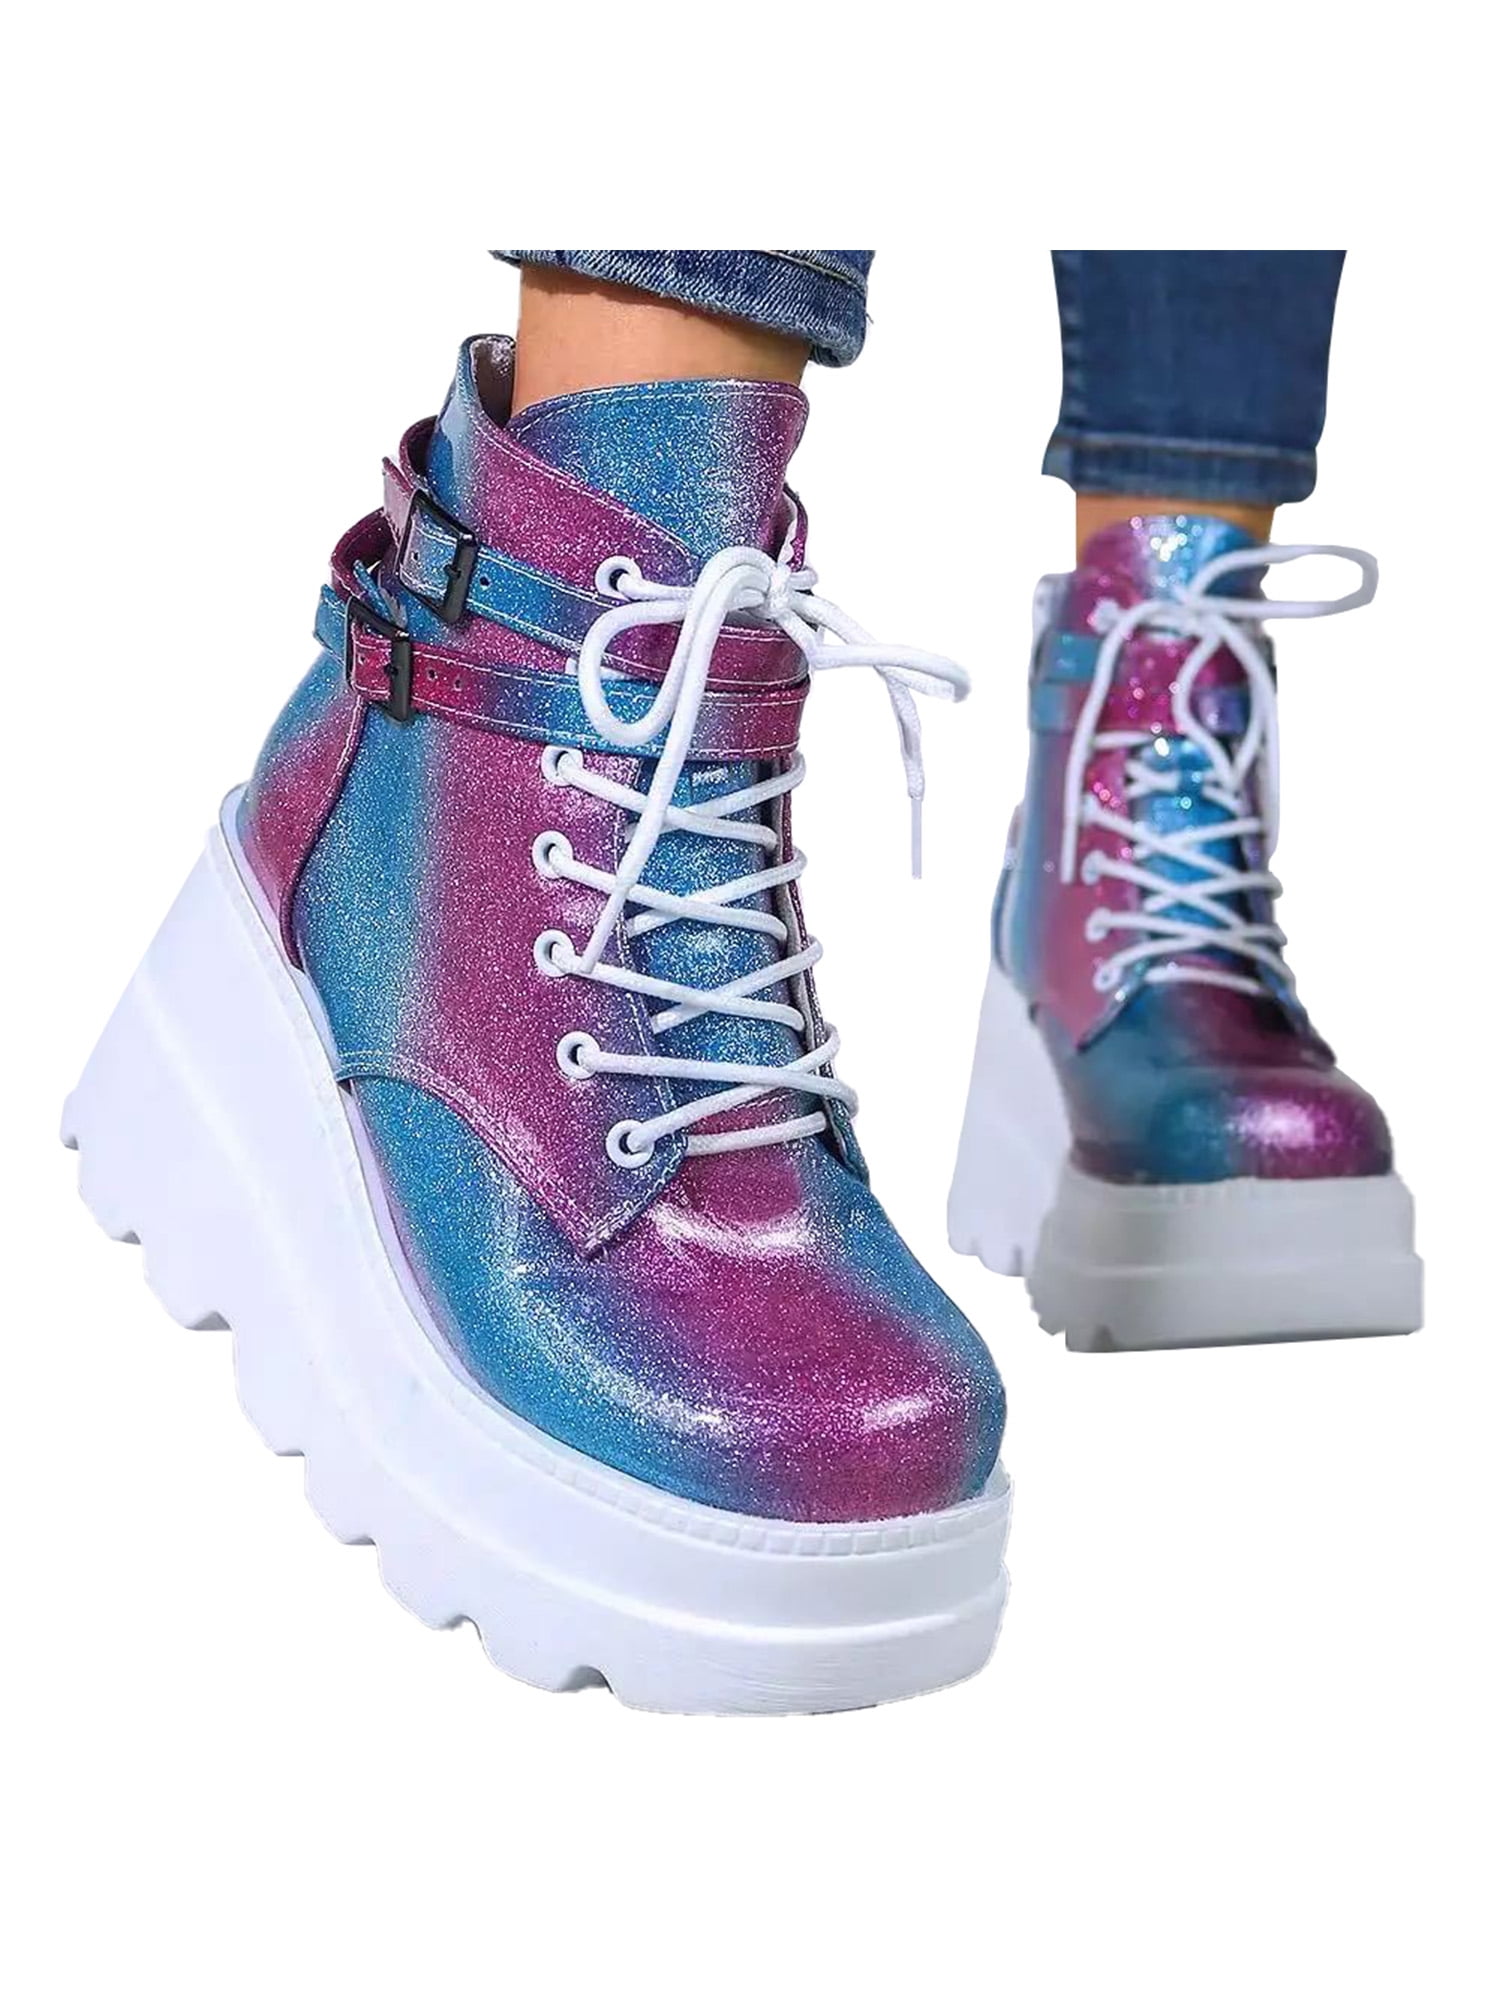 Details about   Women Breathable Platform Wedge Fashion Sneakers High Heels Lace Up Ankle Boots 